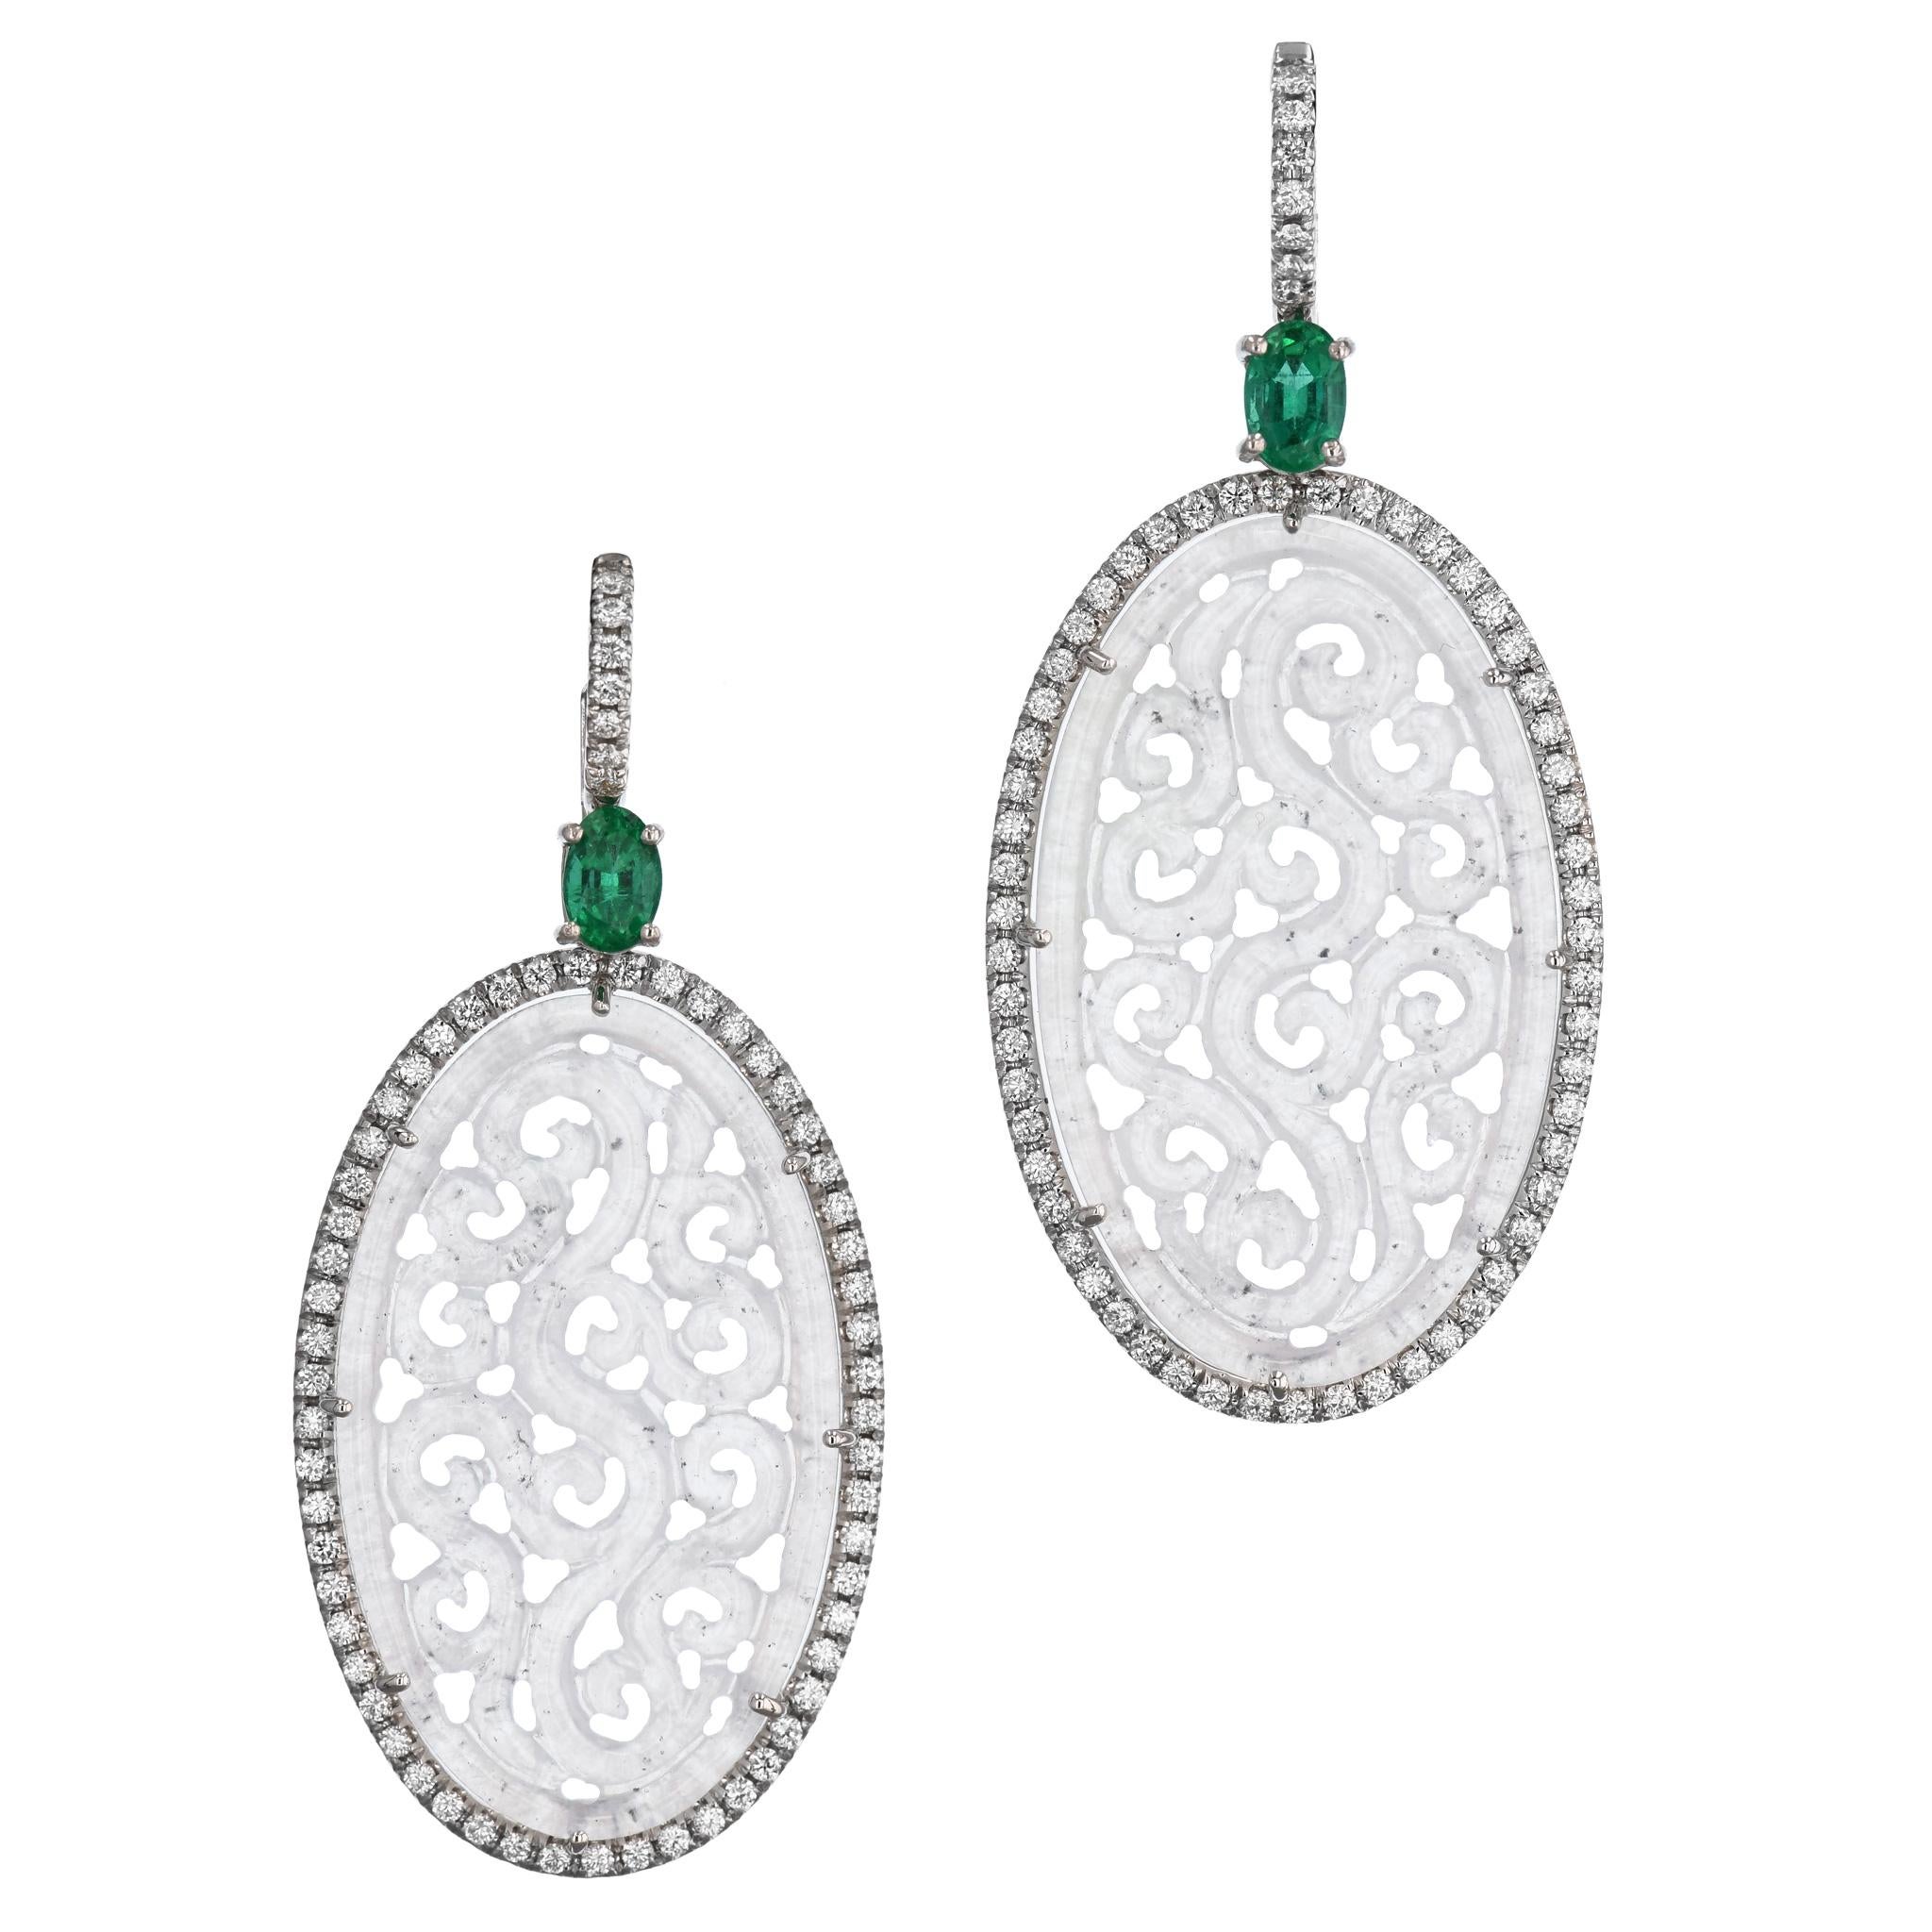 Handmade Icy Jadeite Slices Zambian Emerald Diamond Pave Drop 18 Karat Earrings In New Condition For Sale In Miami, FL